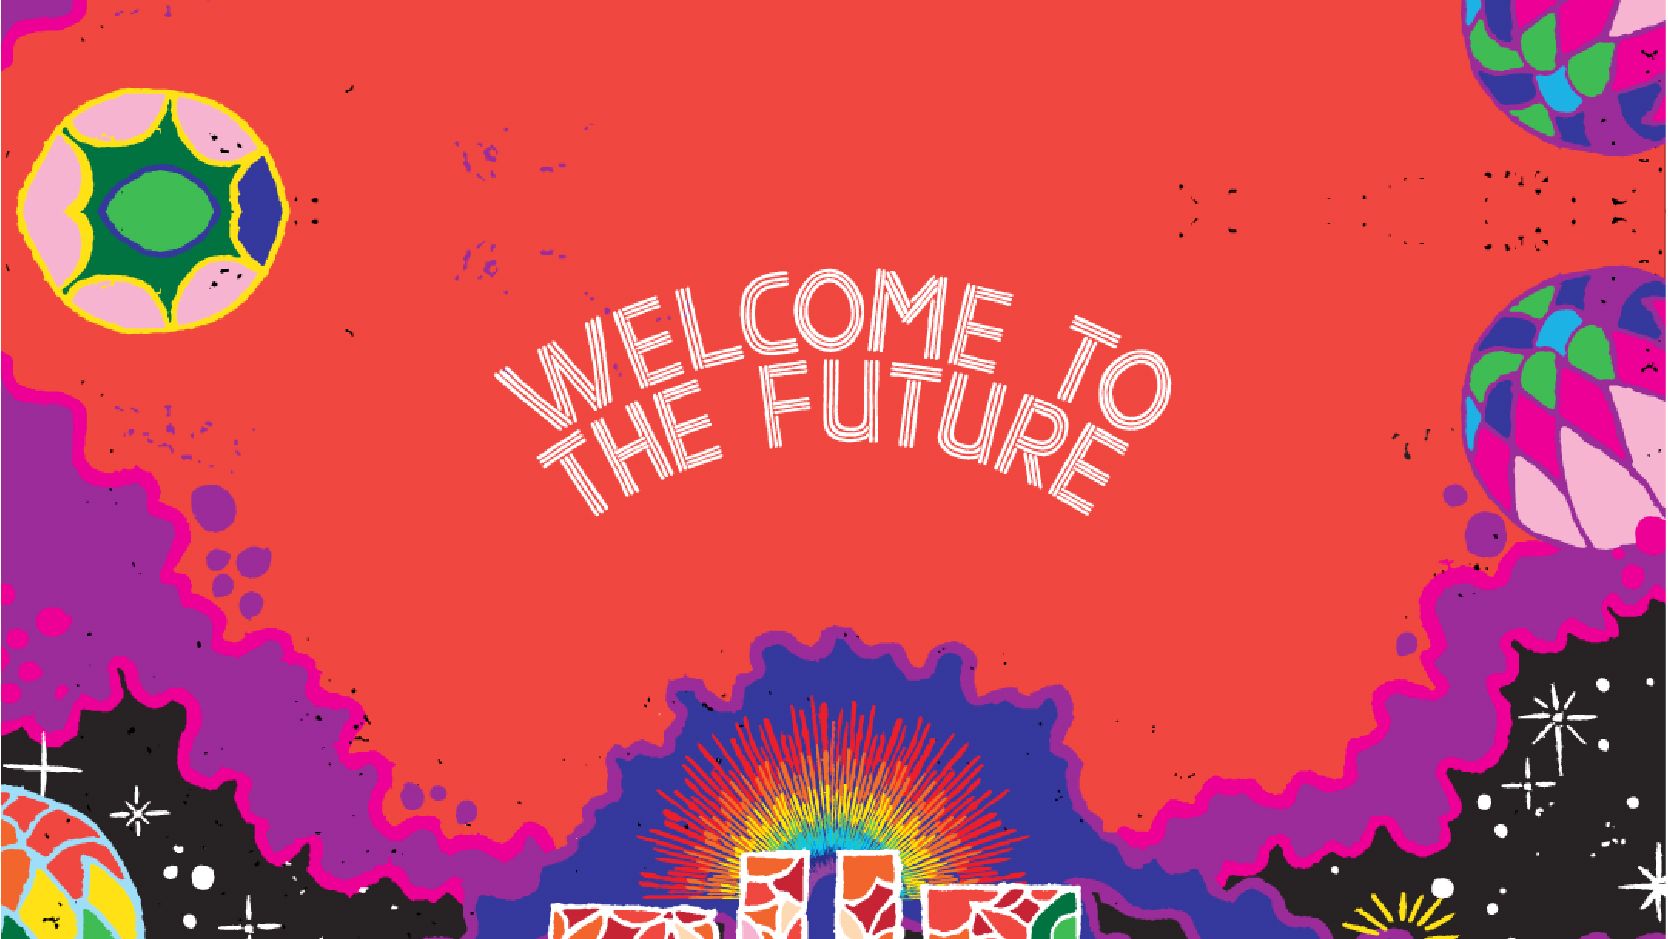 Welcome to the Future cover